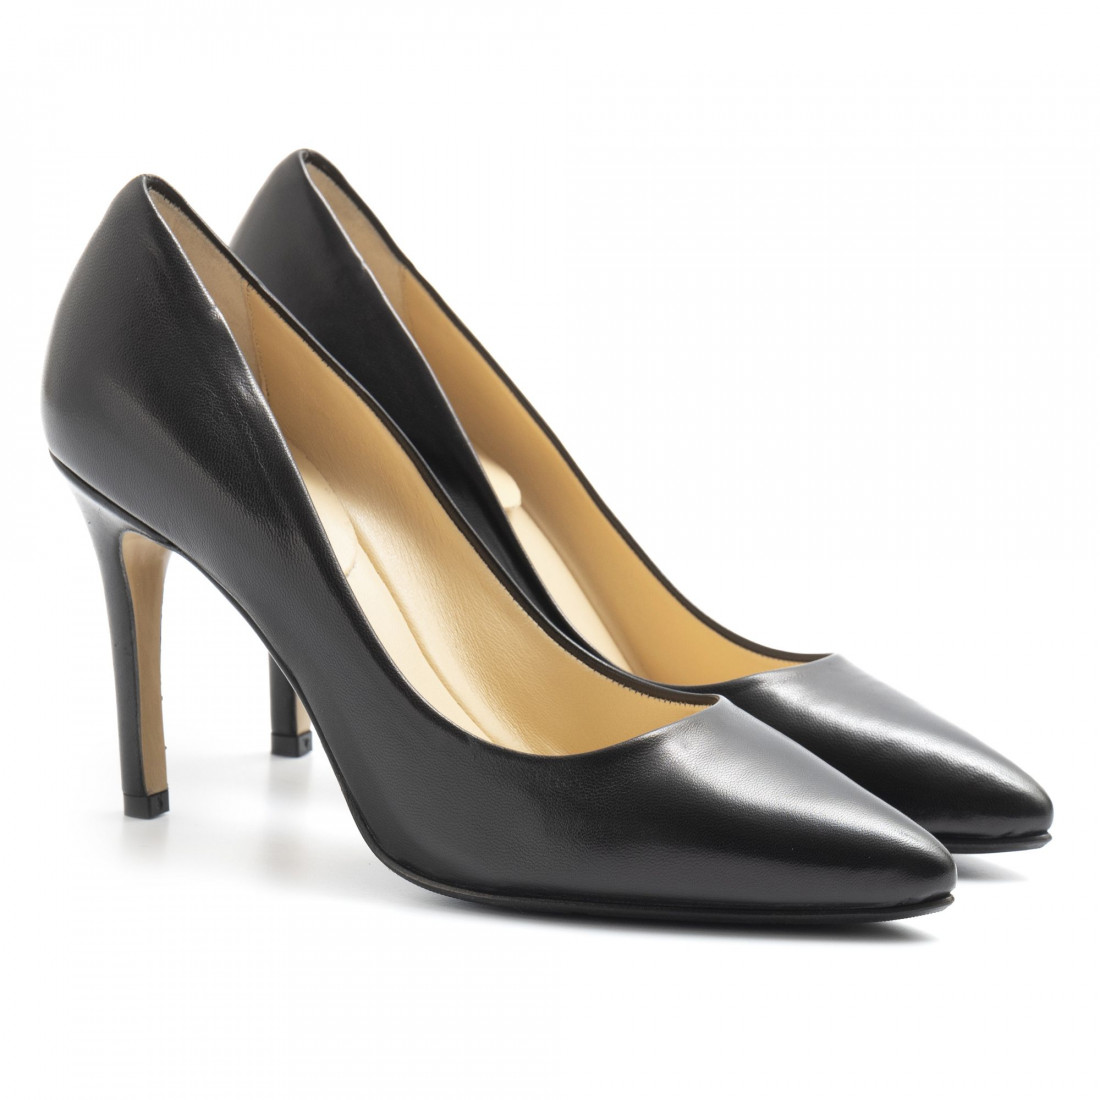 Black soft leather L'Arianna pump with high heel